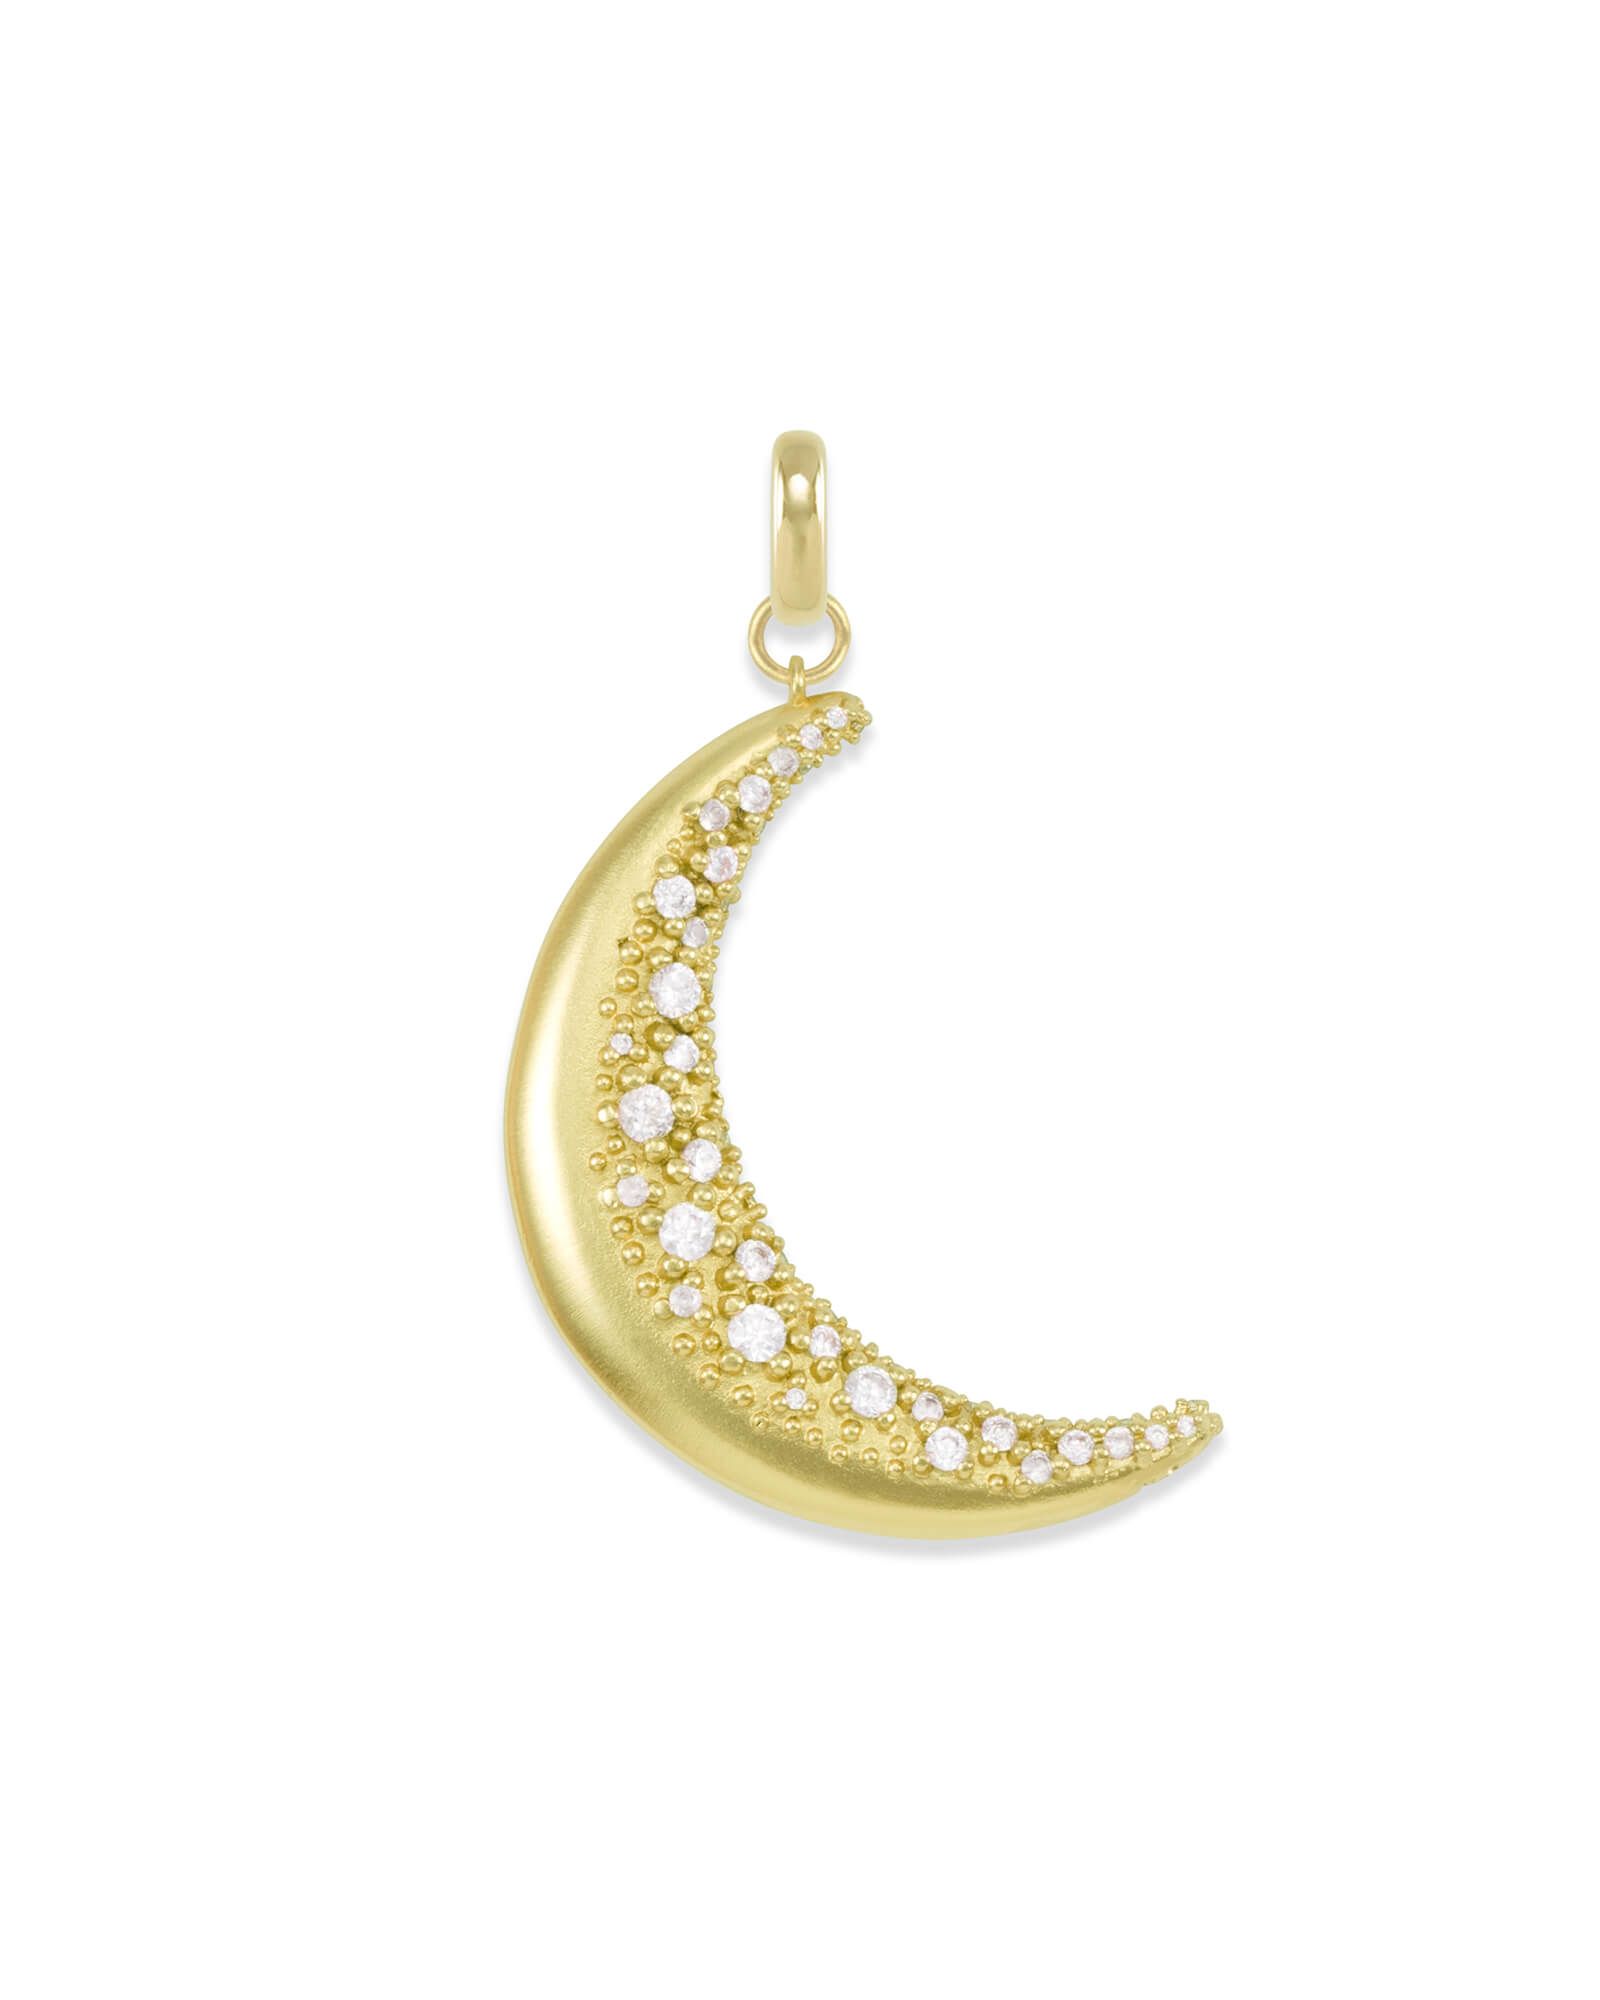 Large Crescent Moon Charm in Gold | Kendra Scott